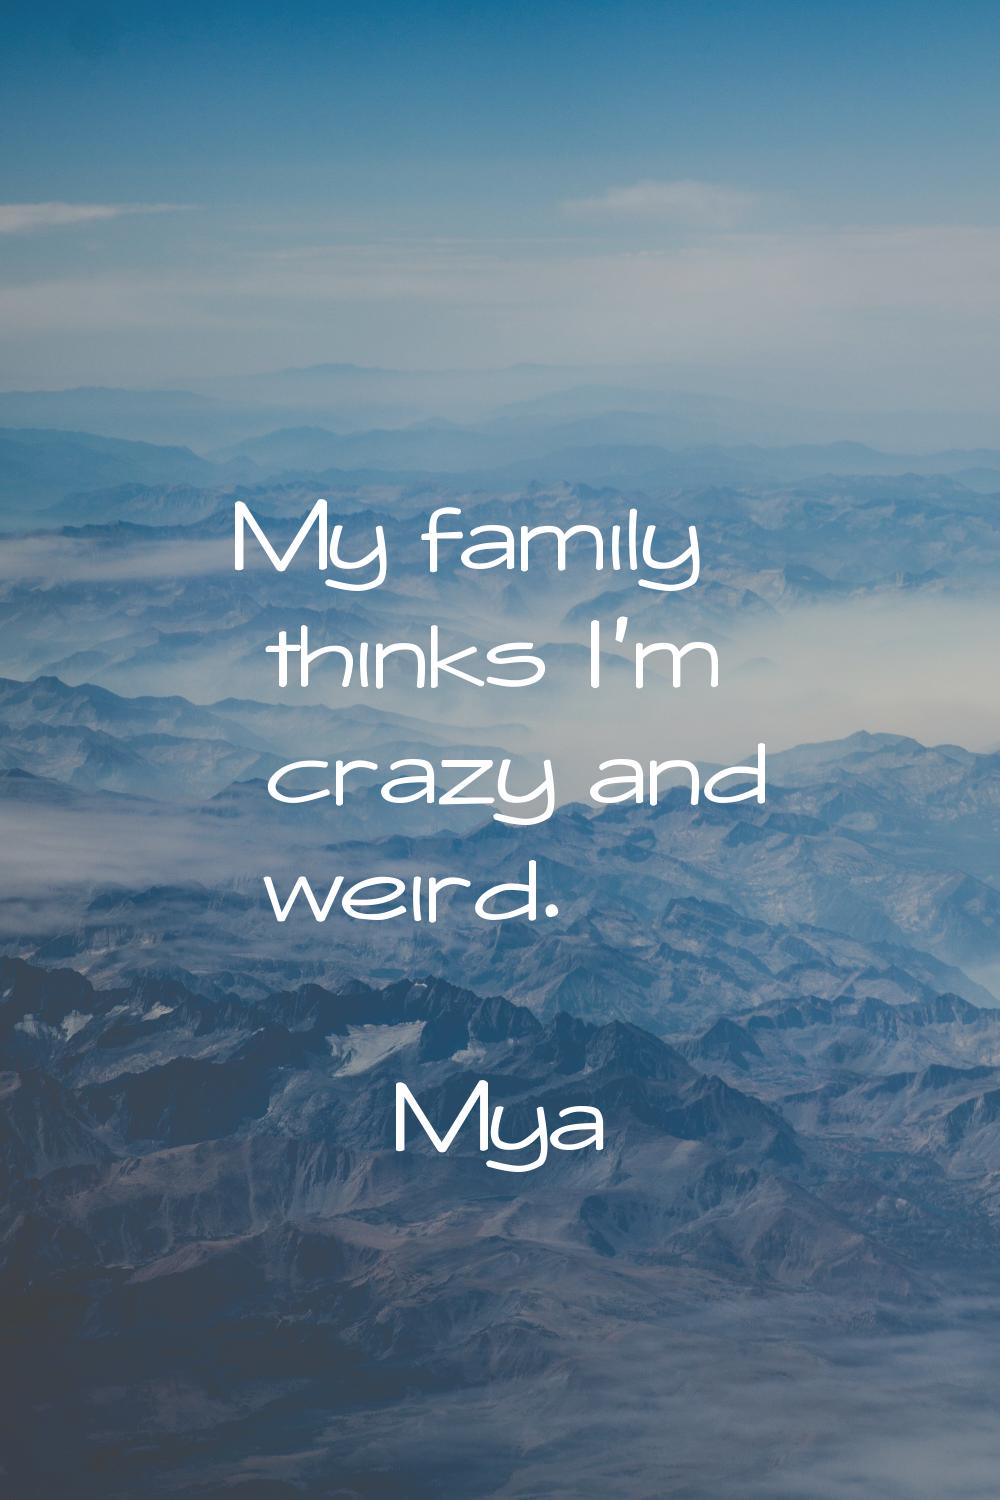 My family thinks I'm crazy and weird.